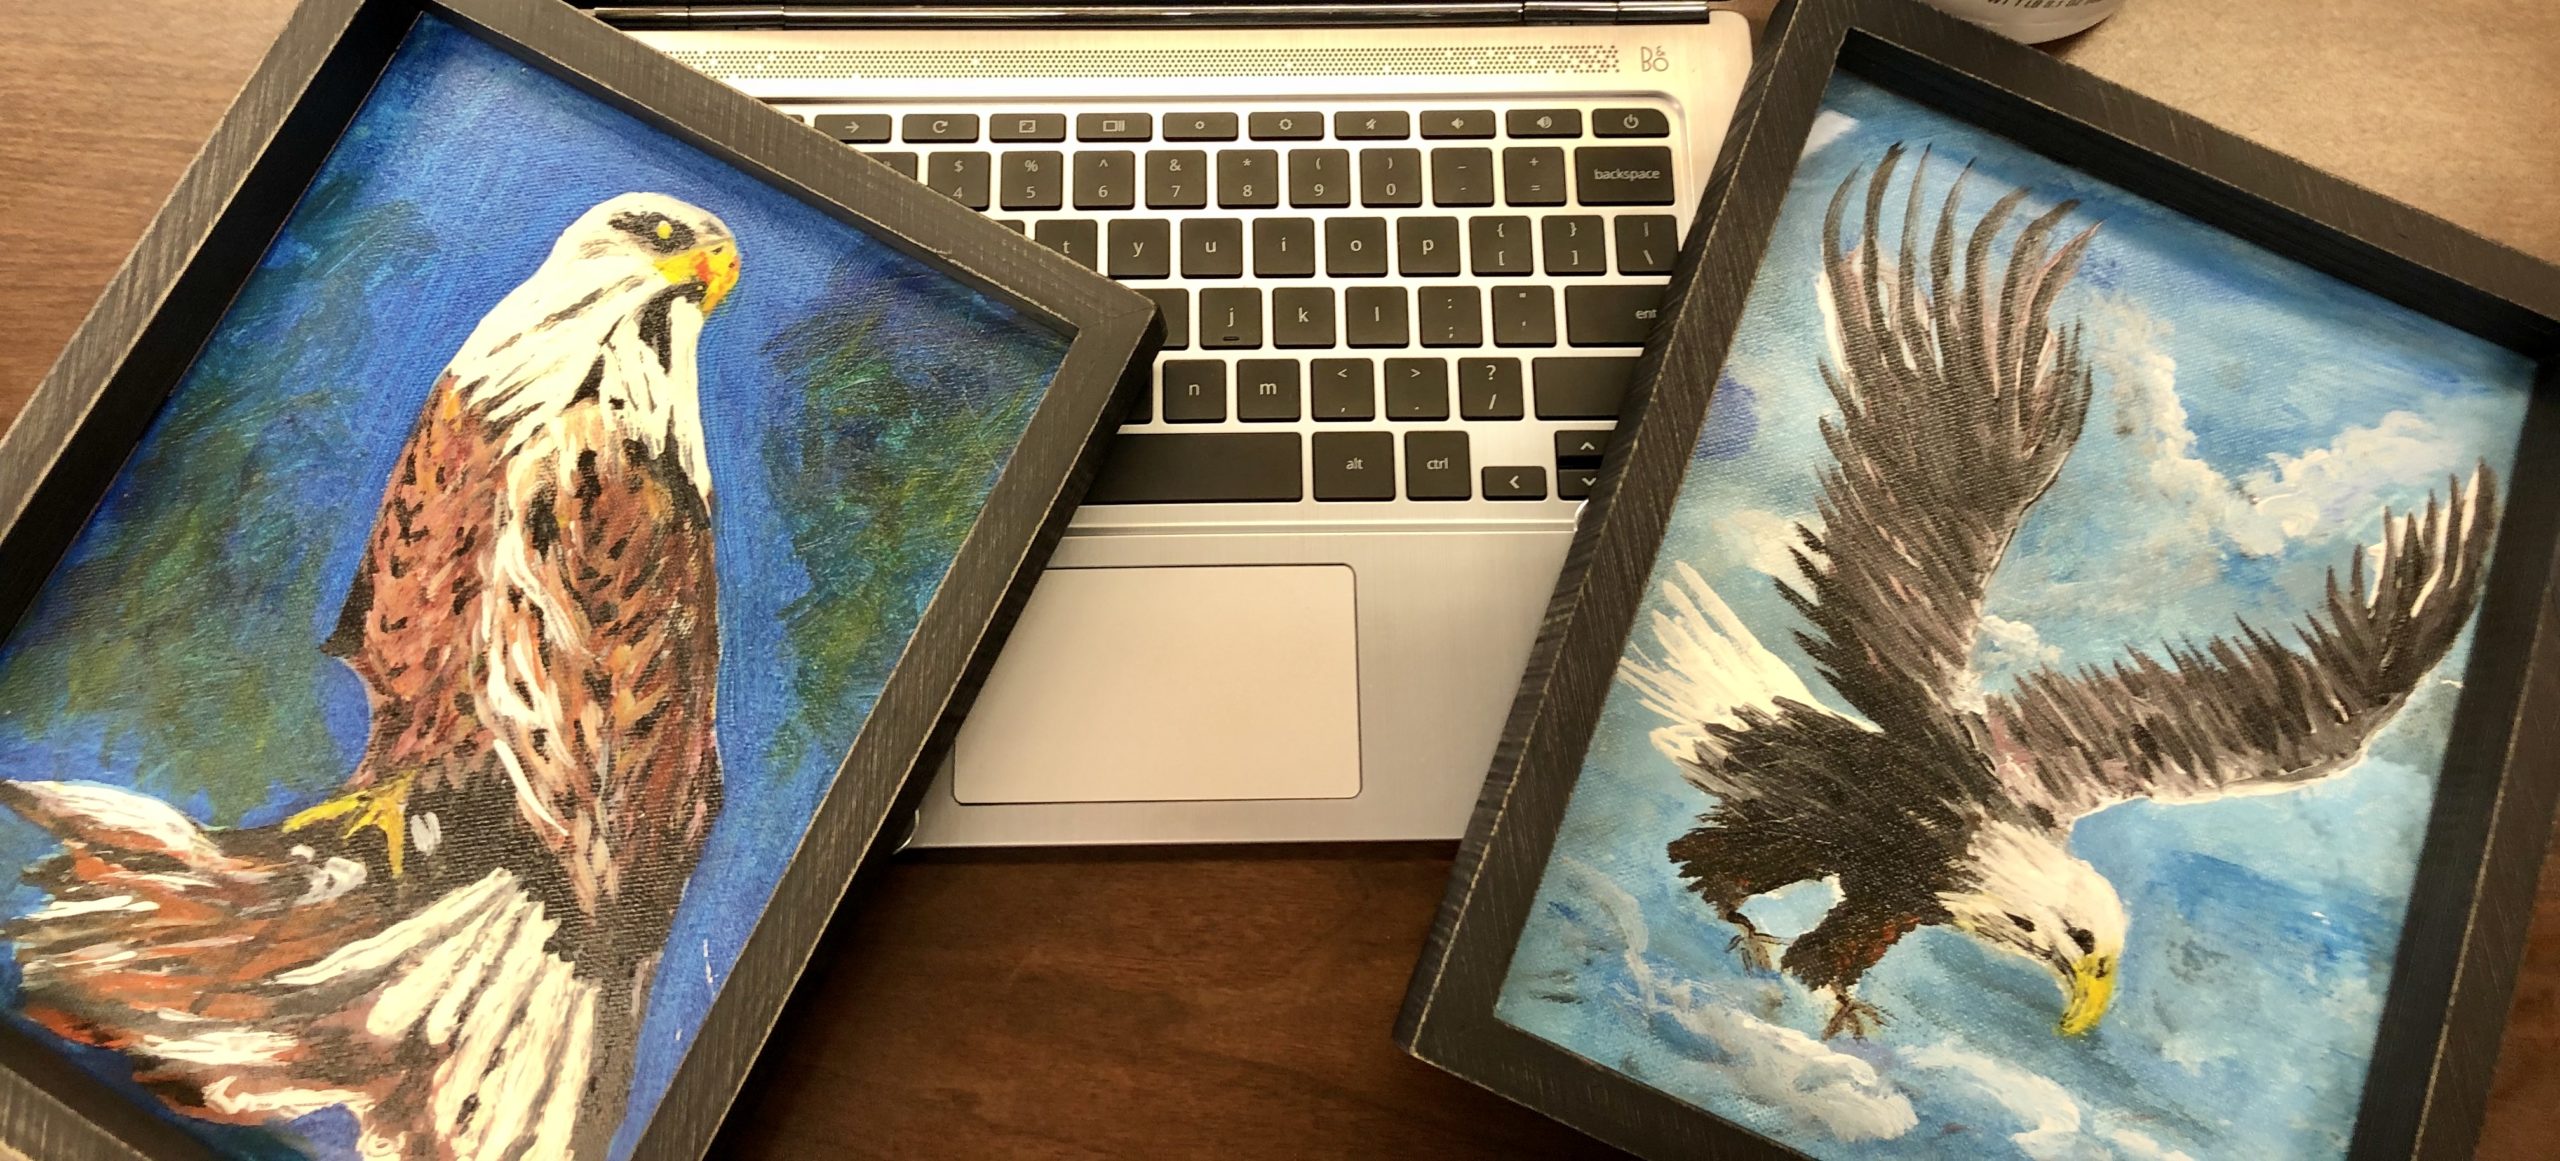 chromebook and eagle picture